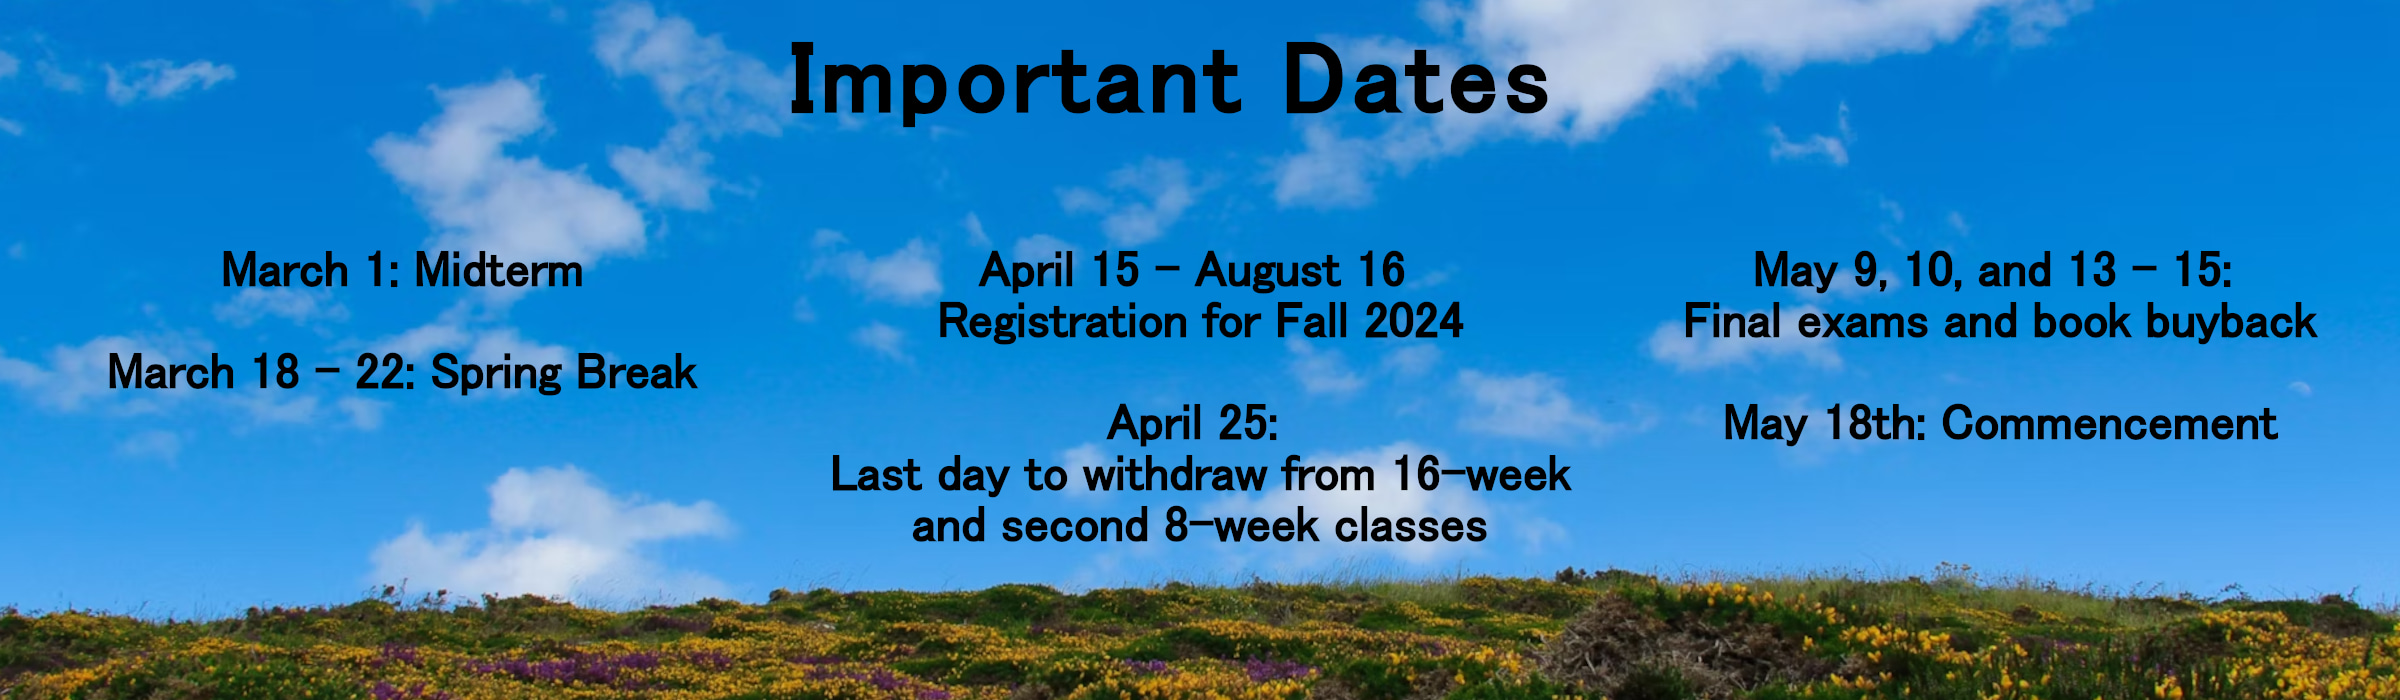 Highland Community College Bookstore Spring 2024 important dates